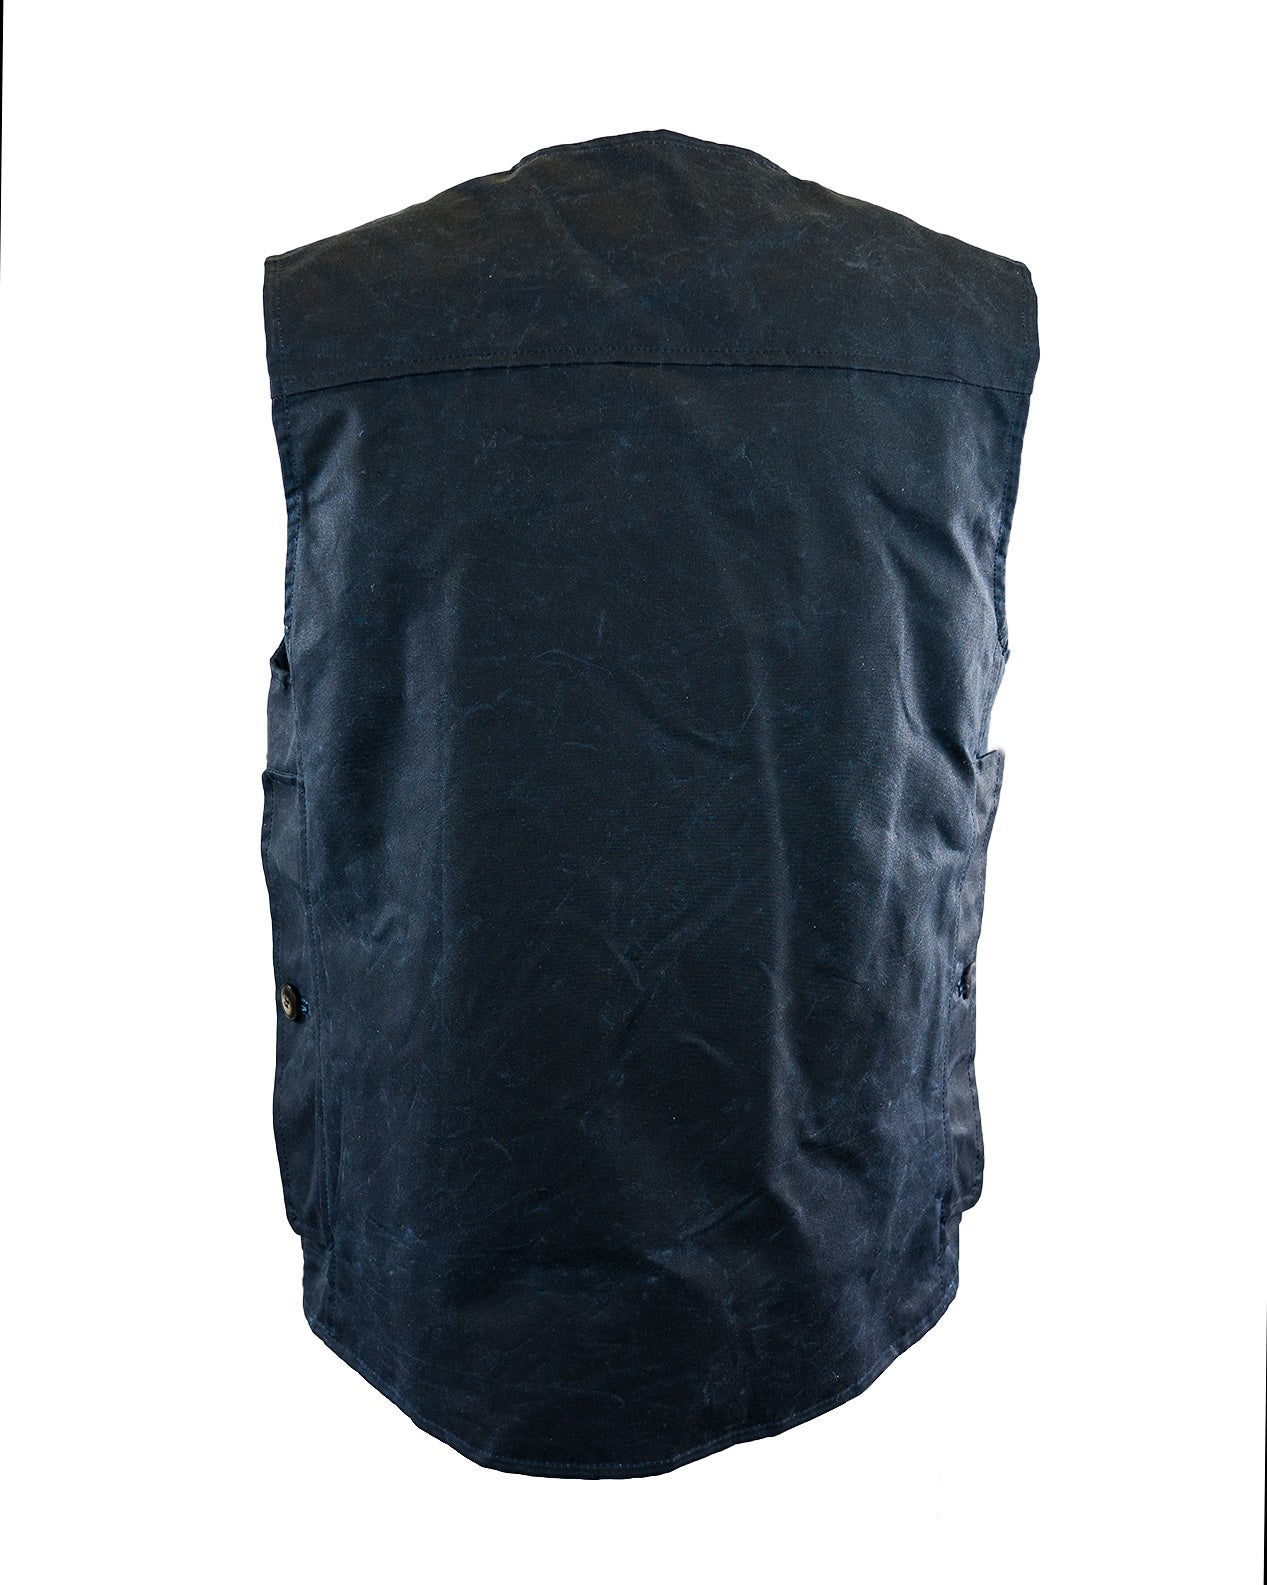 Iconic vest in waxed cotton